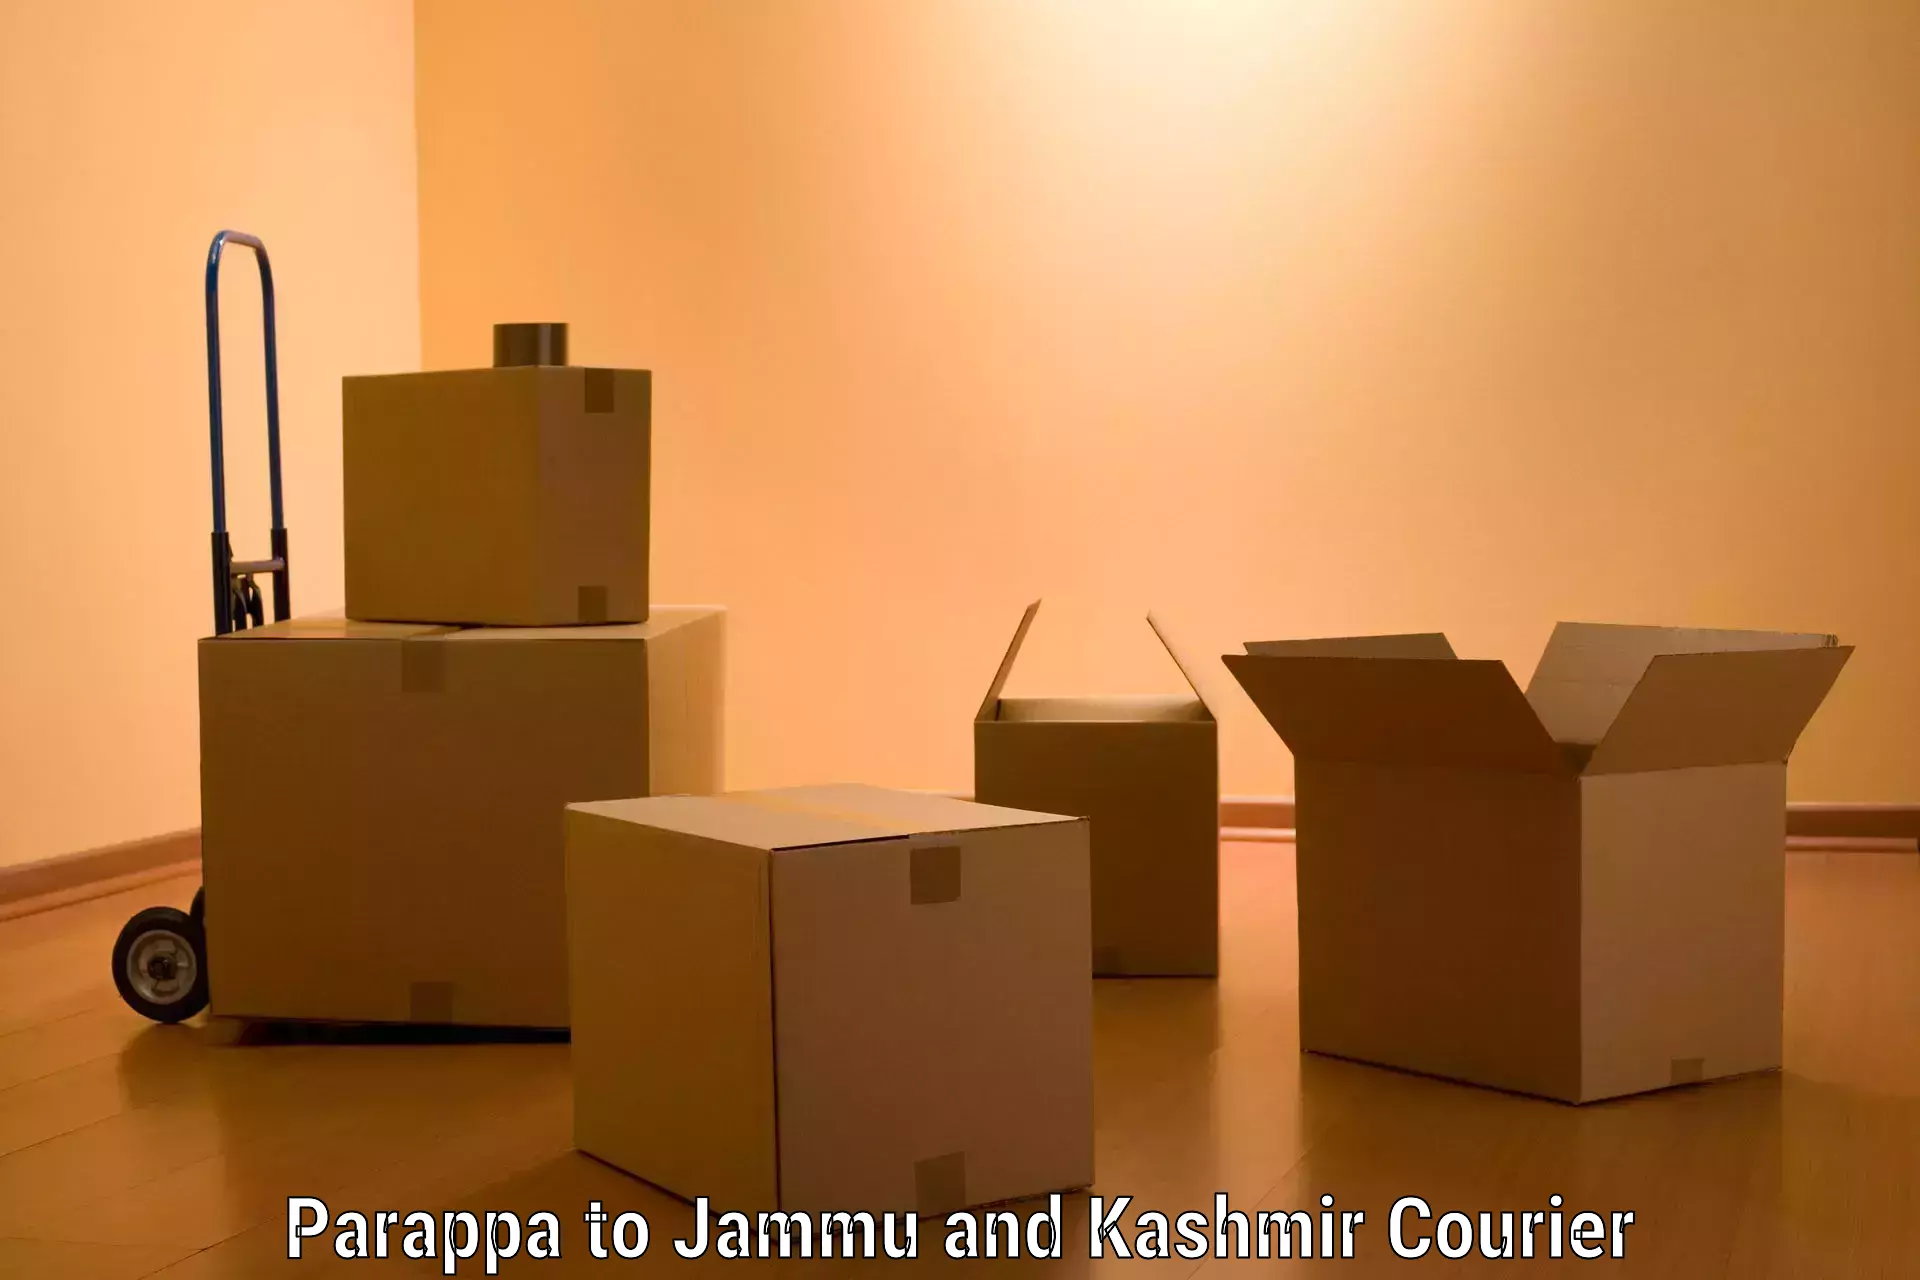 Moving and storage services Parappa to Srinagar Kashmir